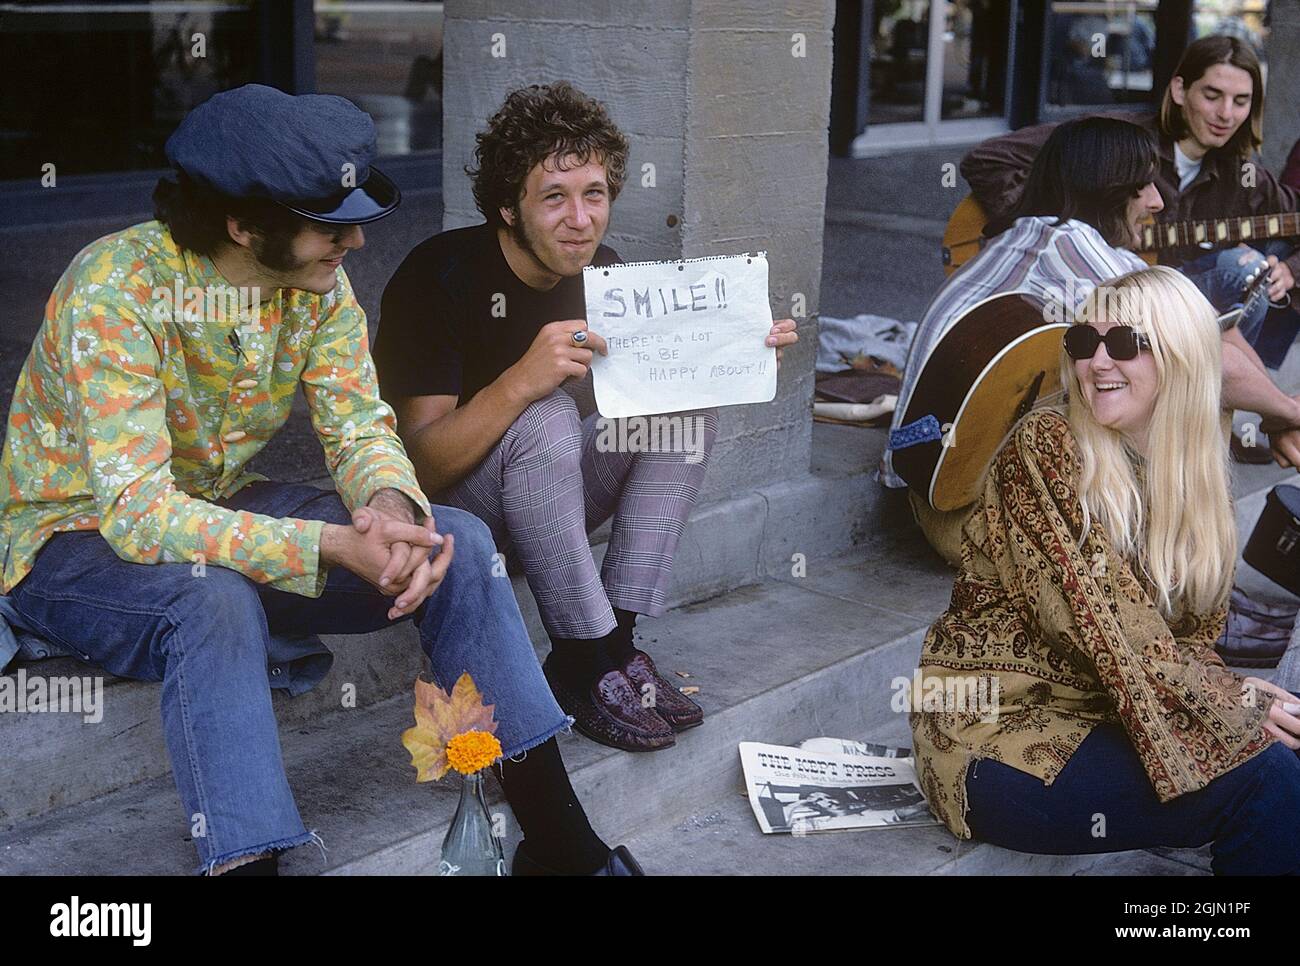 USA december 1968. Students at University of California Berkeley in typical 1968 clothes. The young man is holding an handwritten sign with the message: Smile!! There's a lot to be happy about!! 6-1-19 Credit Roland Palm ref 6-1-14 Stock Photo